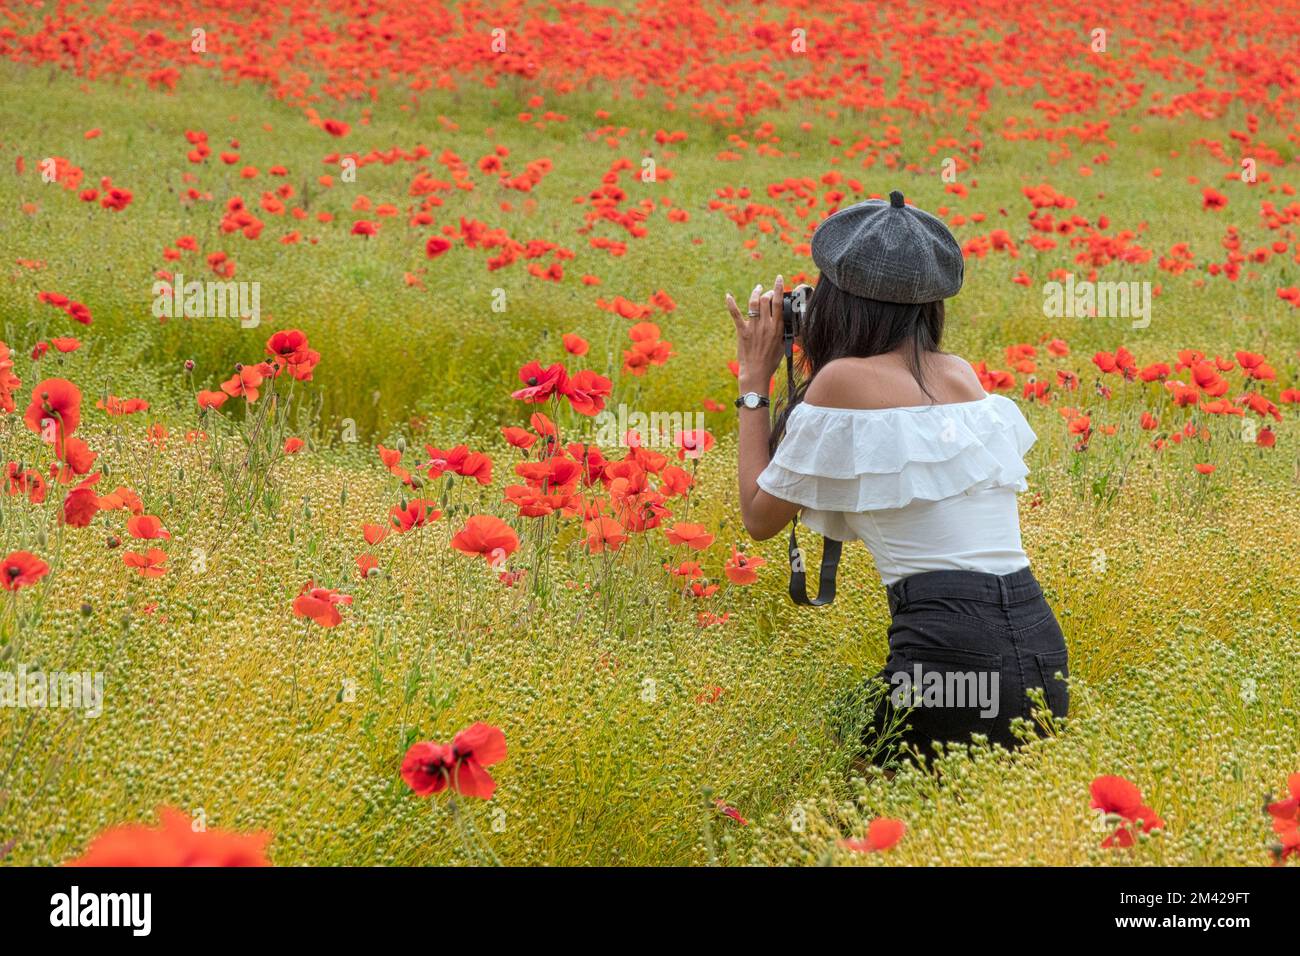 Photographer  In A Poppy Field Stock Photo